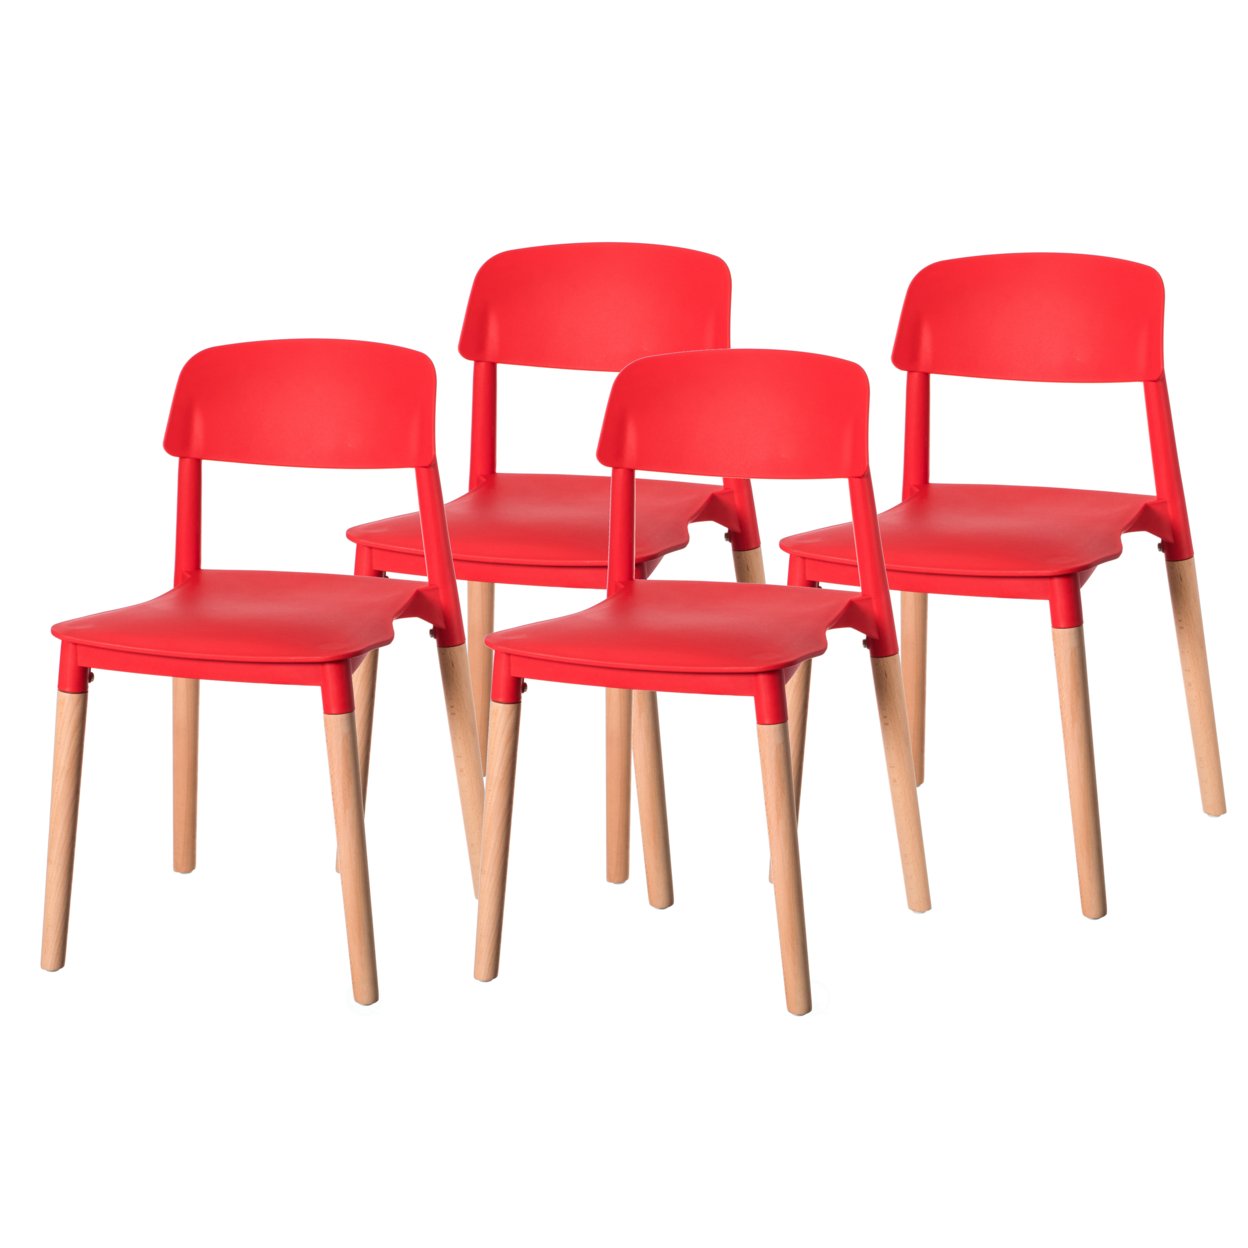 Modern Plastic Dining Chair Open Back With Beech Wood Legs - Set Of 4 Red